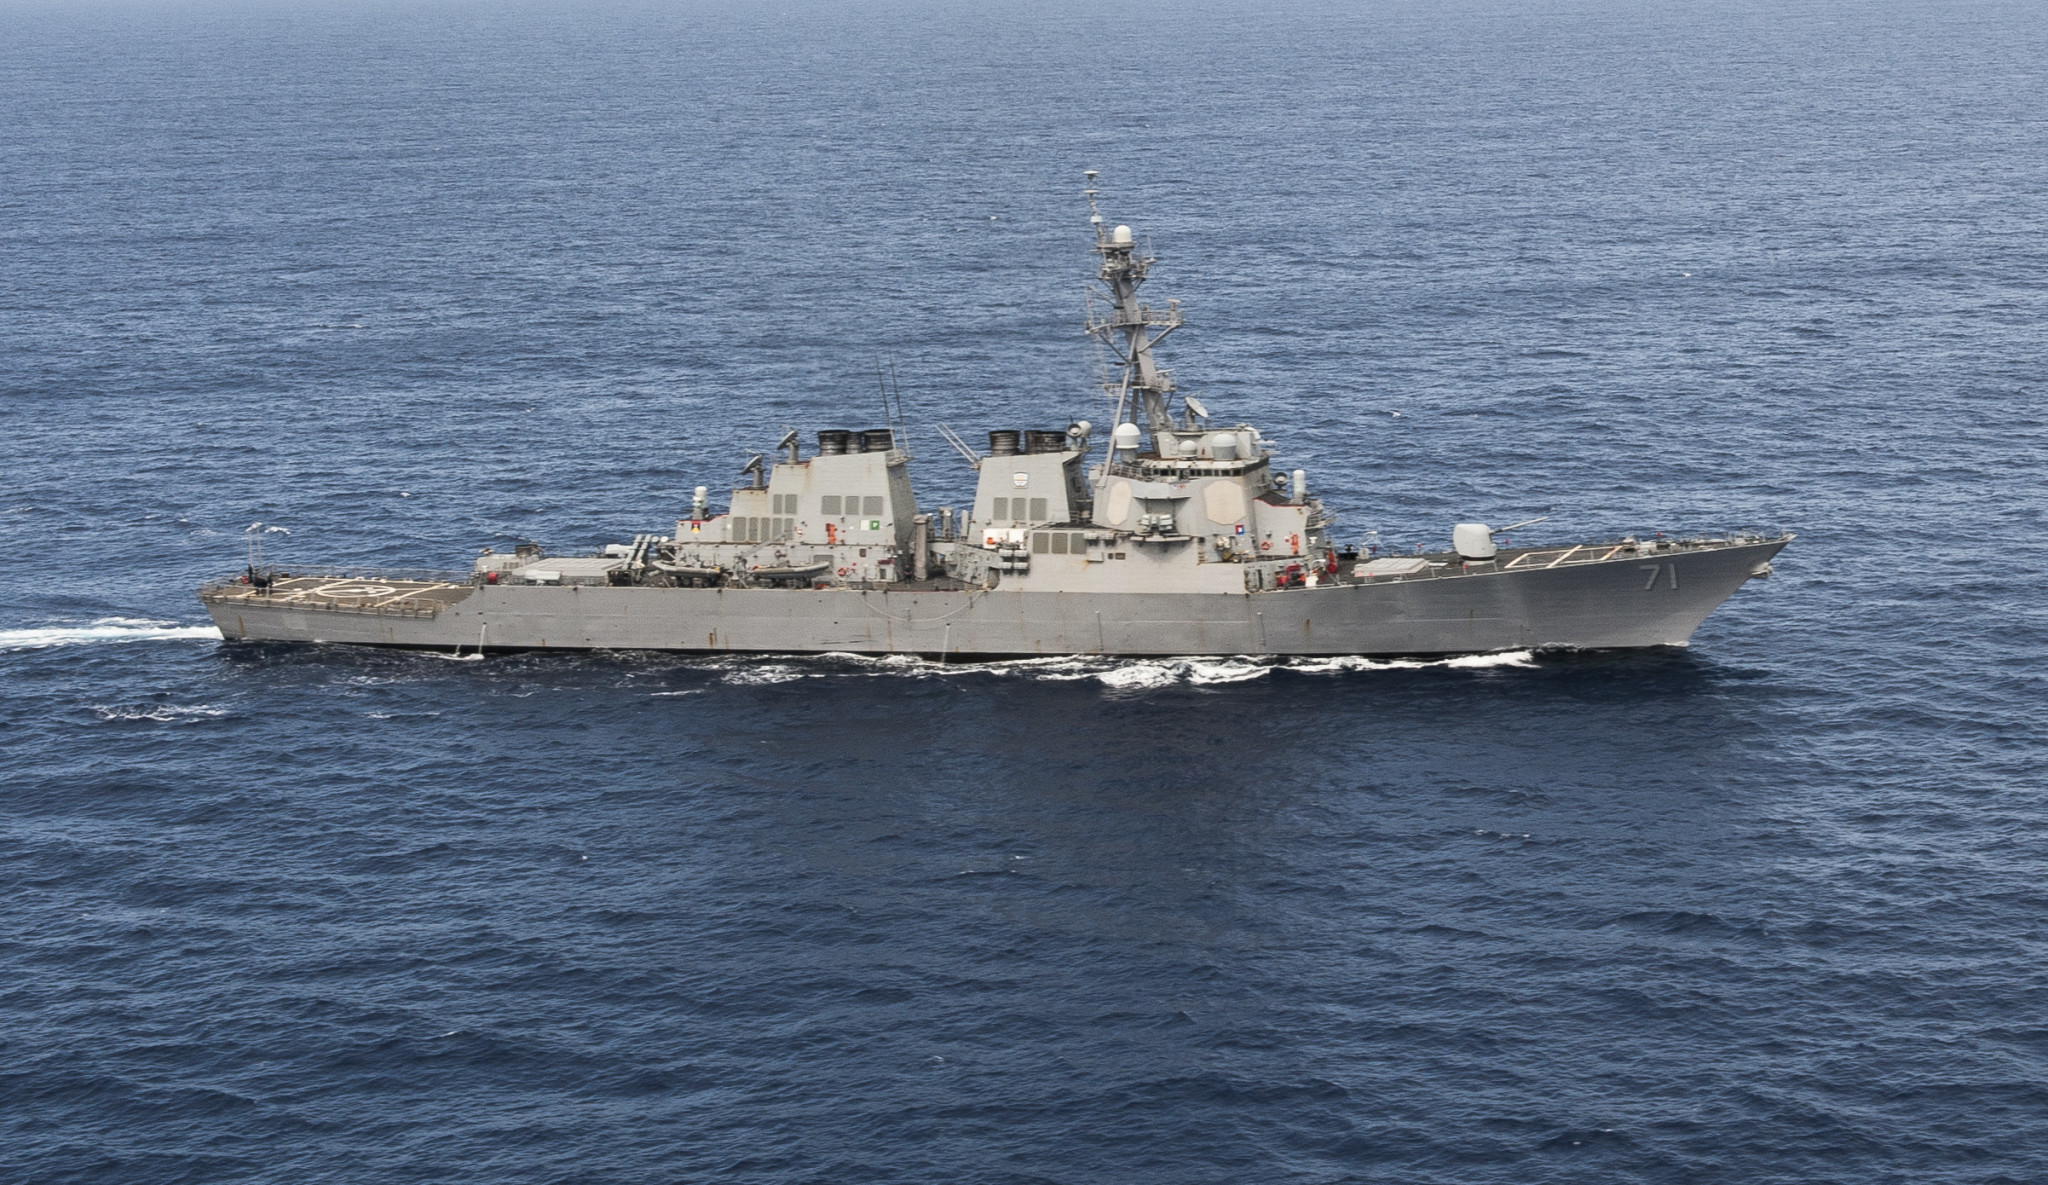 140319-N-WX580-158 ATLANTIC OCEAN (March 19, 2014) The guided-missile destroyer USS Ross (DDG 71) transits the Atlantic Ocean in support of exercise Joint Warrior 14-1. Joint Warrior 14-1 is a semiannual, United Kingdom-led training exercise. (U.S. Navy photo by Mass Communication Specialist 3rd Class Lacordrick Wilson/Released)